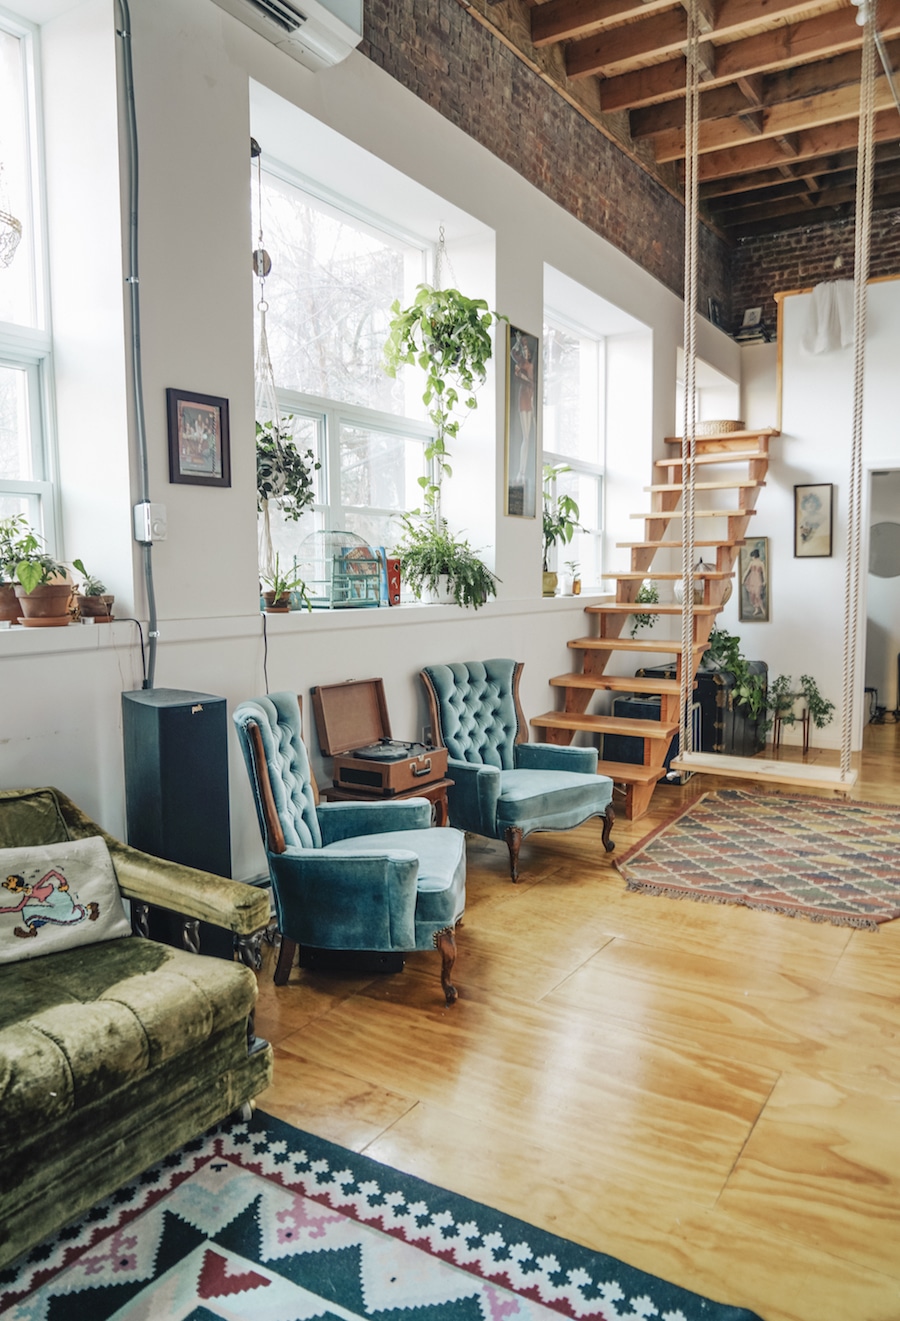 Where to Stay in Brooklyn: The Funky Loft